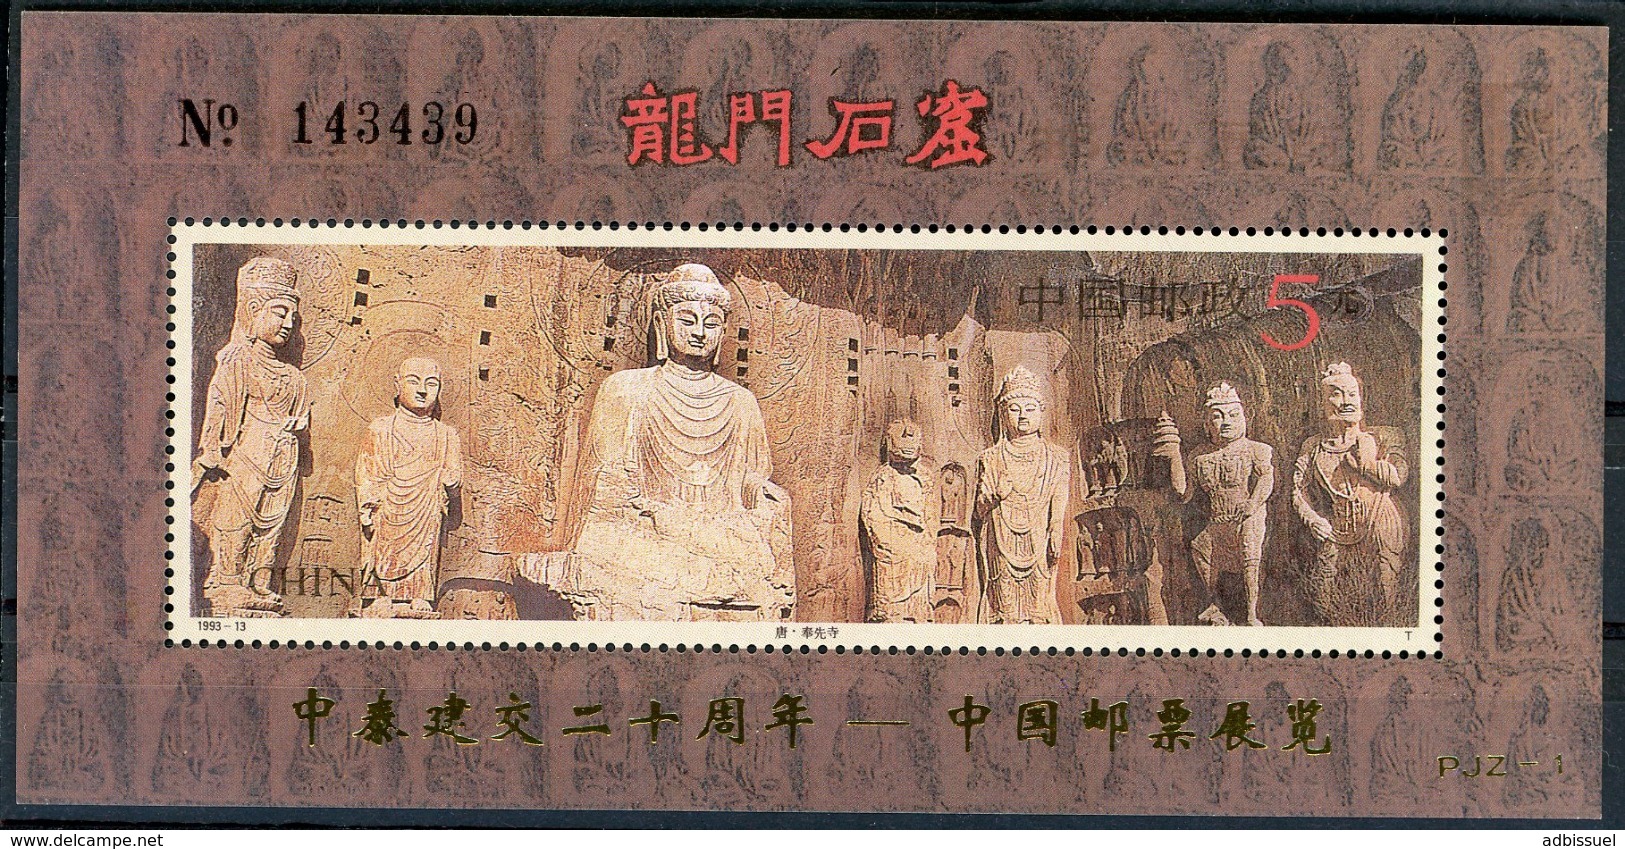 1995 CHINA / BF N° 77 (Yvert & Tellier) / ** MNH. Cat. Value = 10 € - Hojas Bloque